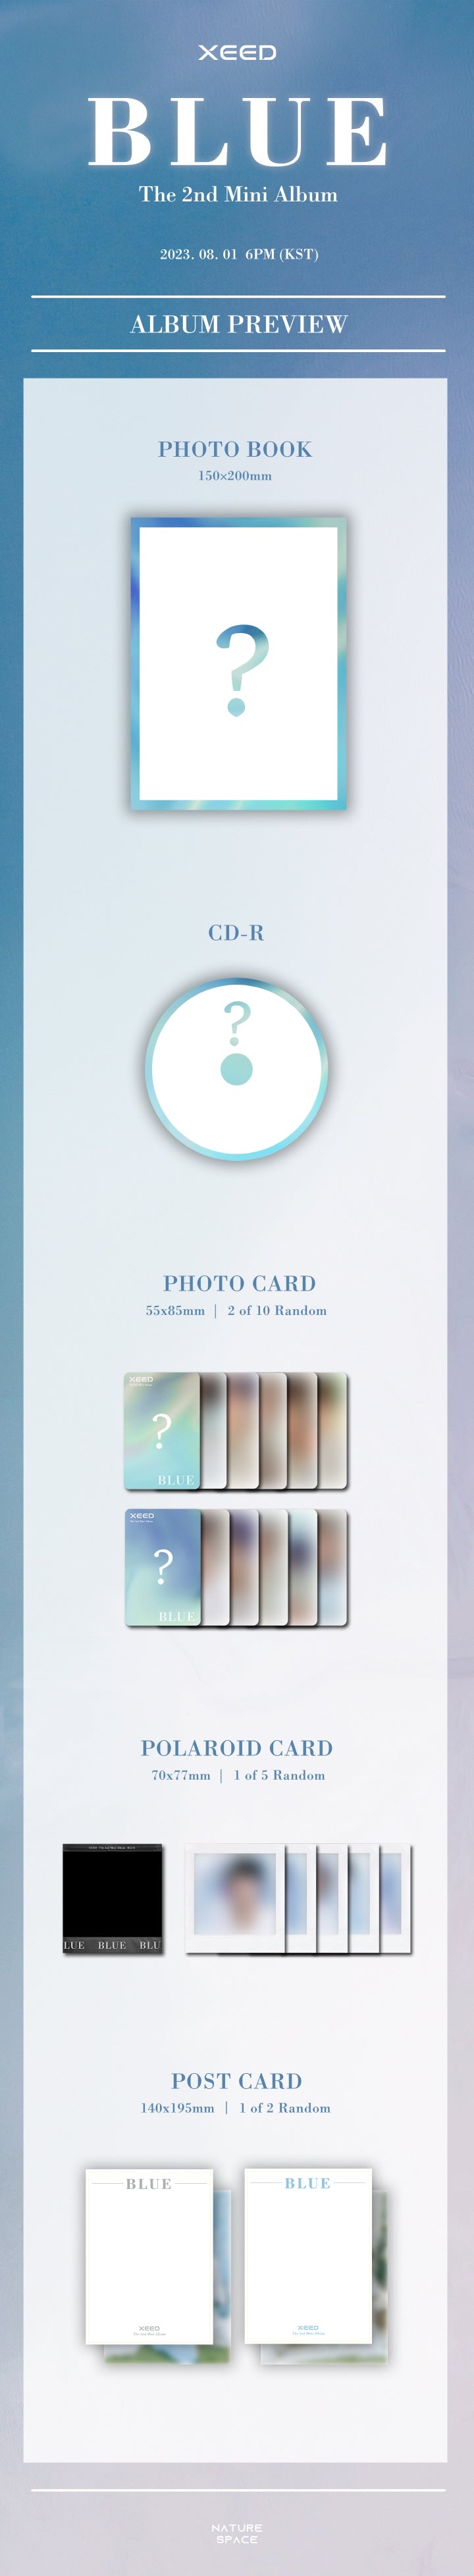 1 CD
1 Photo Book
2 Photo Cards (random out of 10 types)
1 Polaroid Card (random out of 5 types)
1 Postcard (random out of...